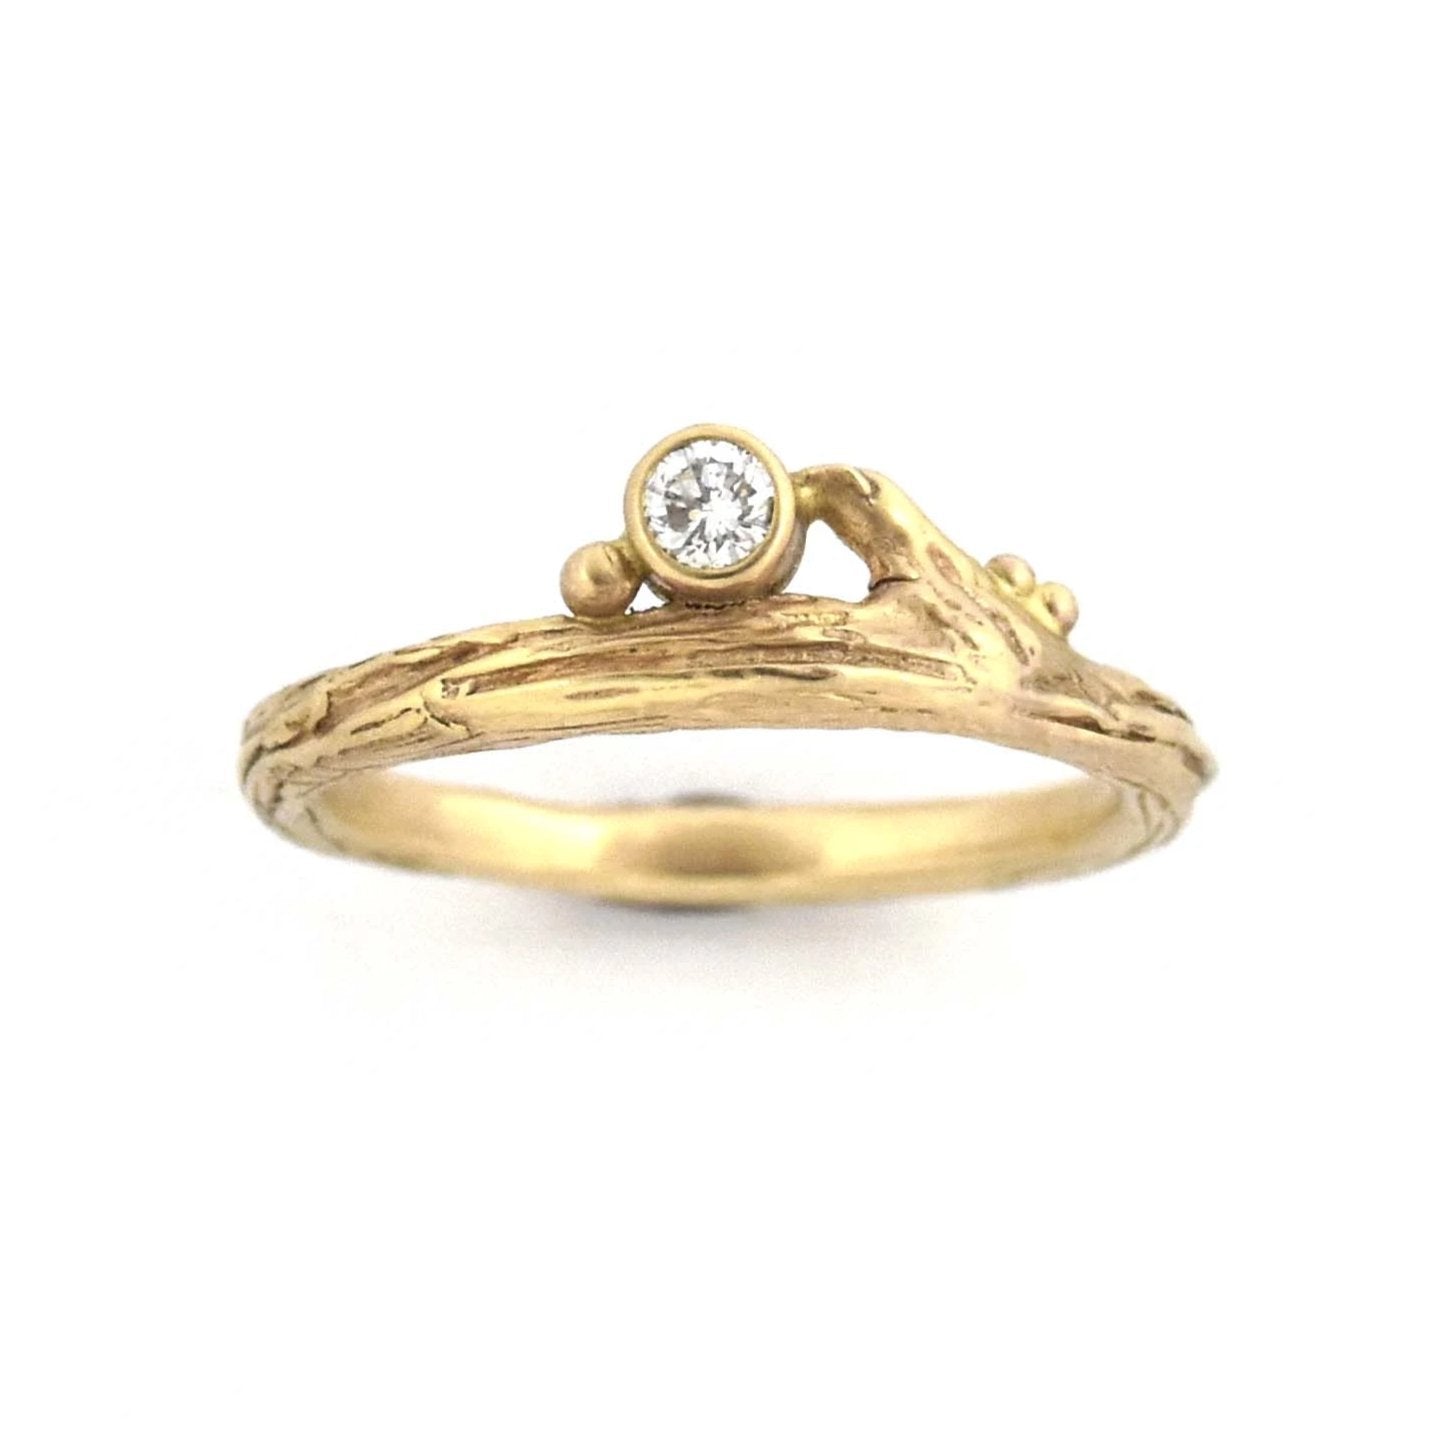 Yellow Gold Diamond & Roses Twig Ring - your choice of stone - Wedding Ring Sapphire / 4 Sapphire / 4.25 3891 - handmade by Beth Millner Jewelry